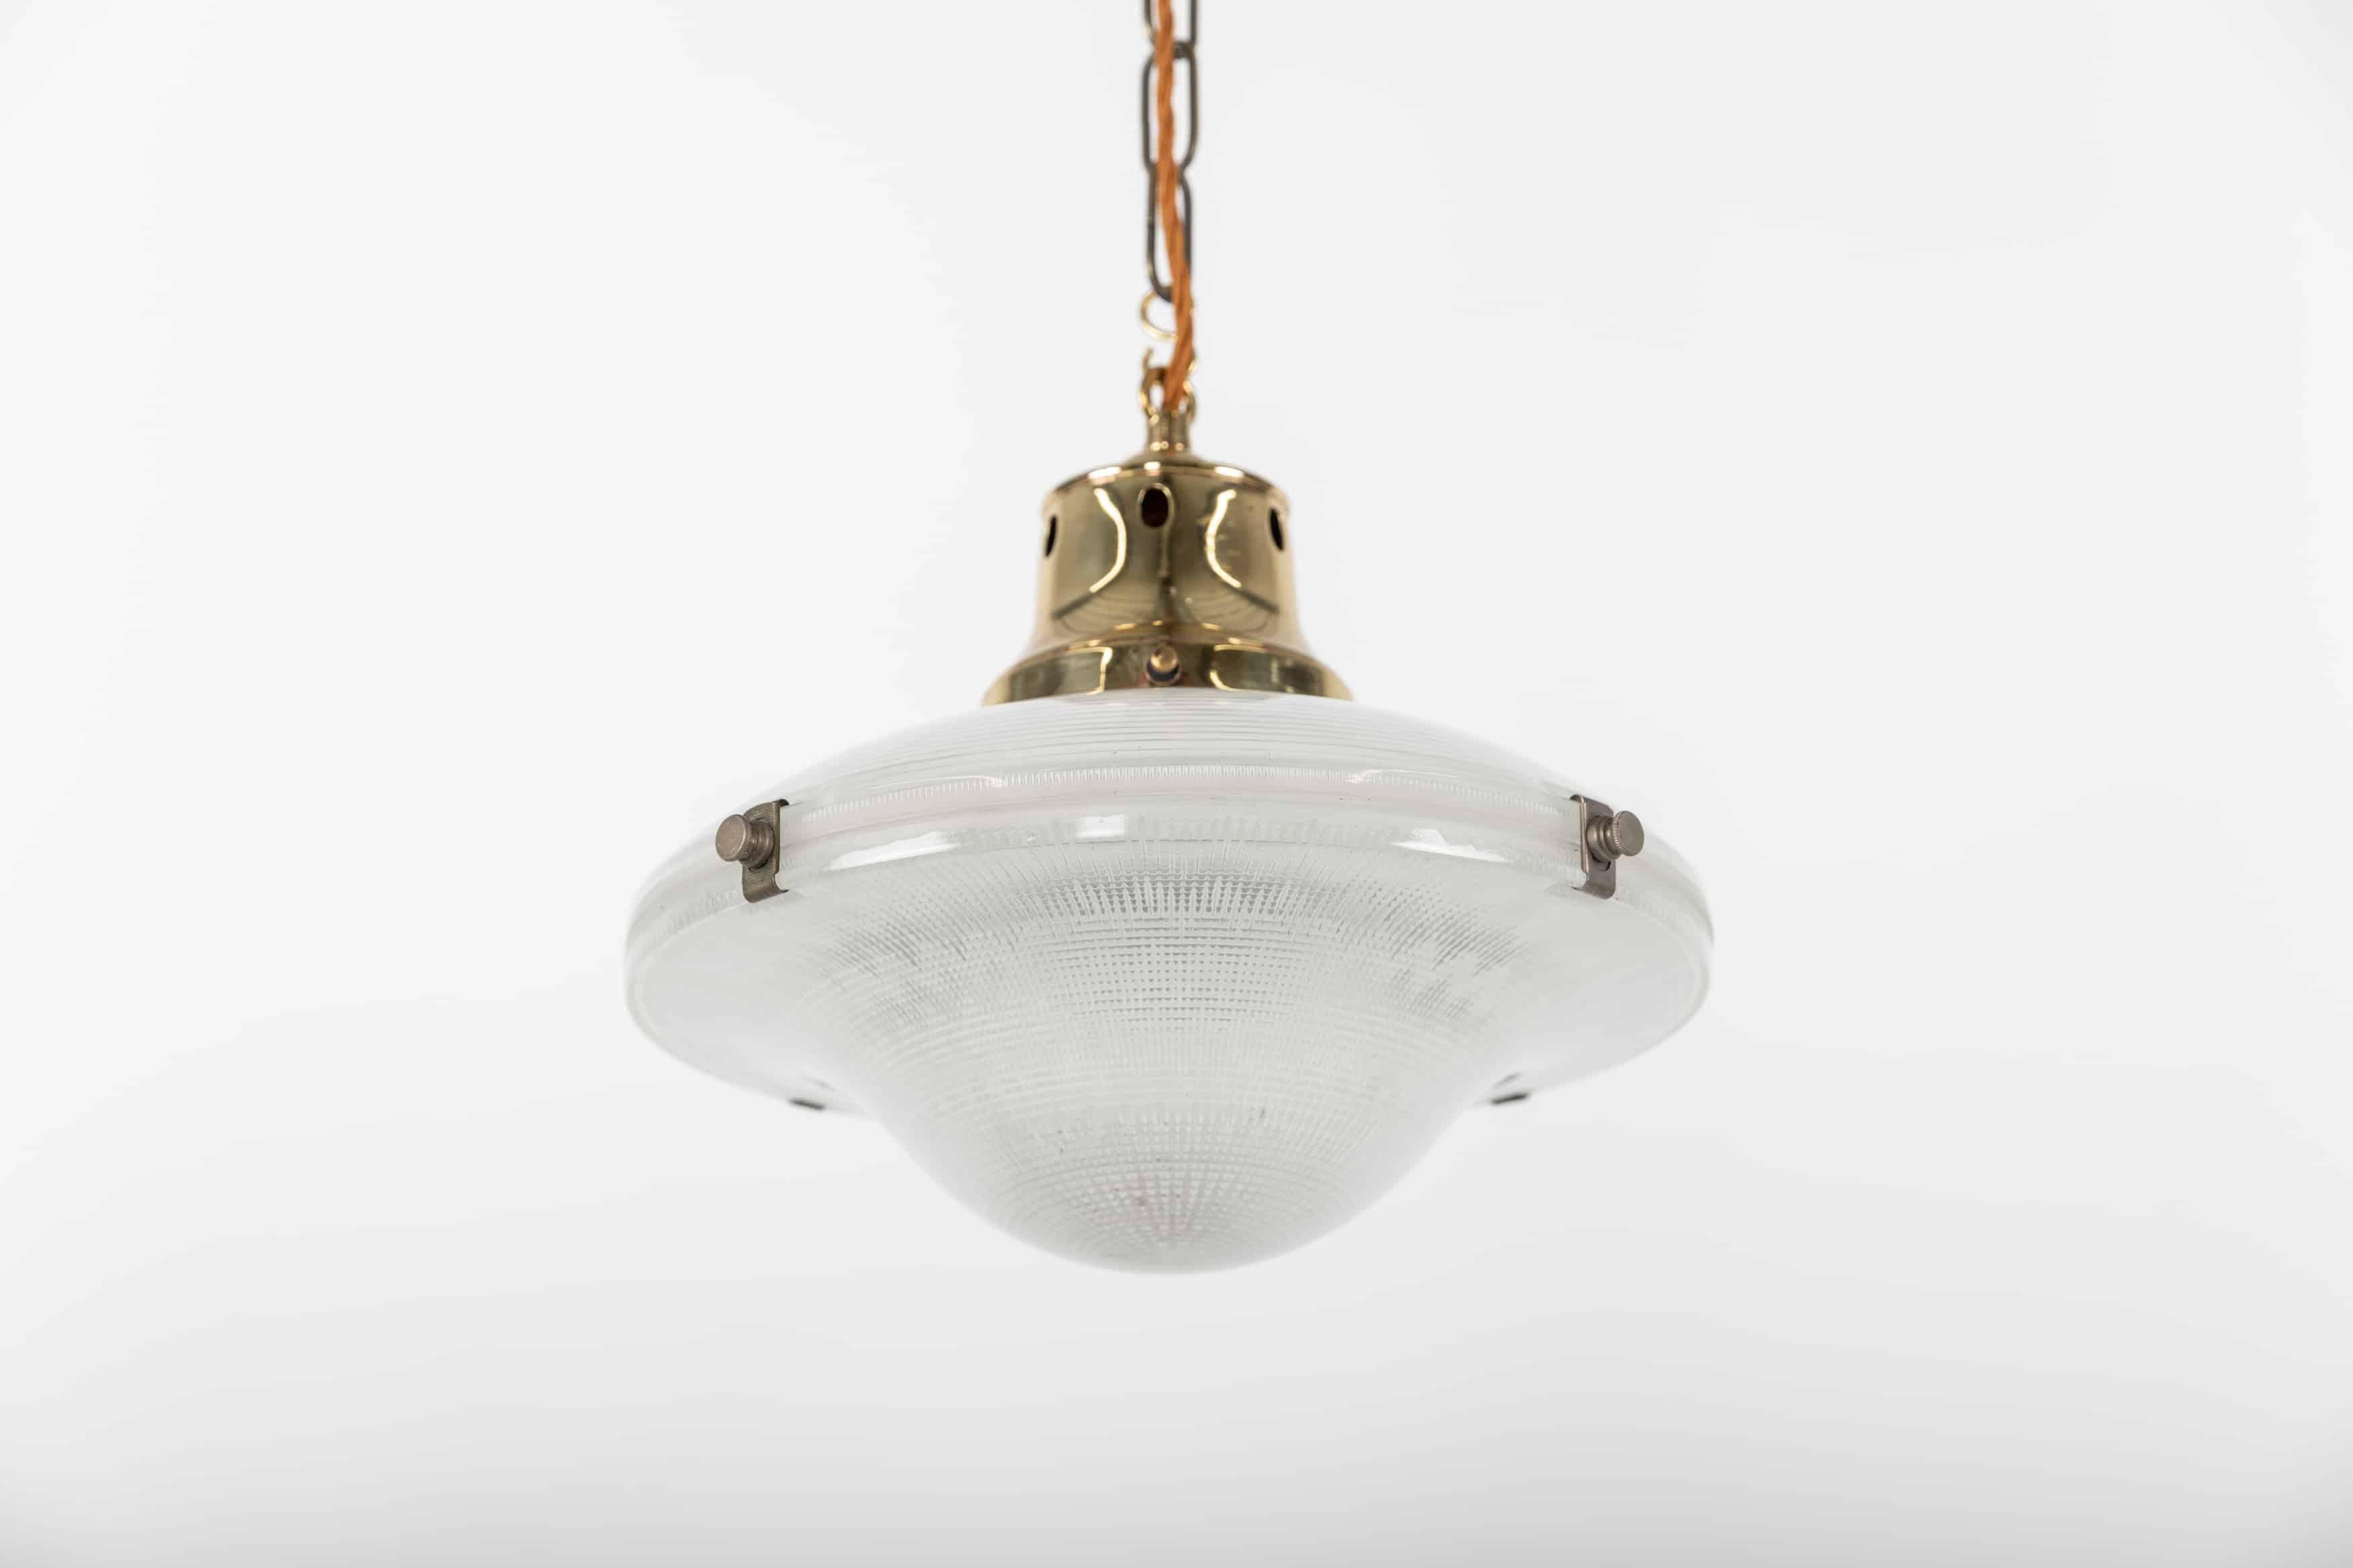 A beautifully designed glass reflector pendant light made in England by Holophane. c.1920

Often wrongly coined as 'flying saucers', the correct name being the 'Ripple-lite’ - this two-part glass reflector shade has survived in wonderful condition